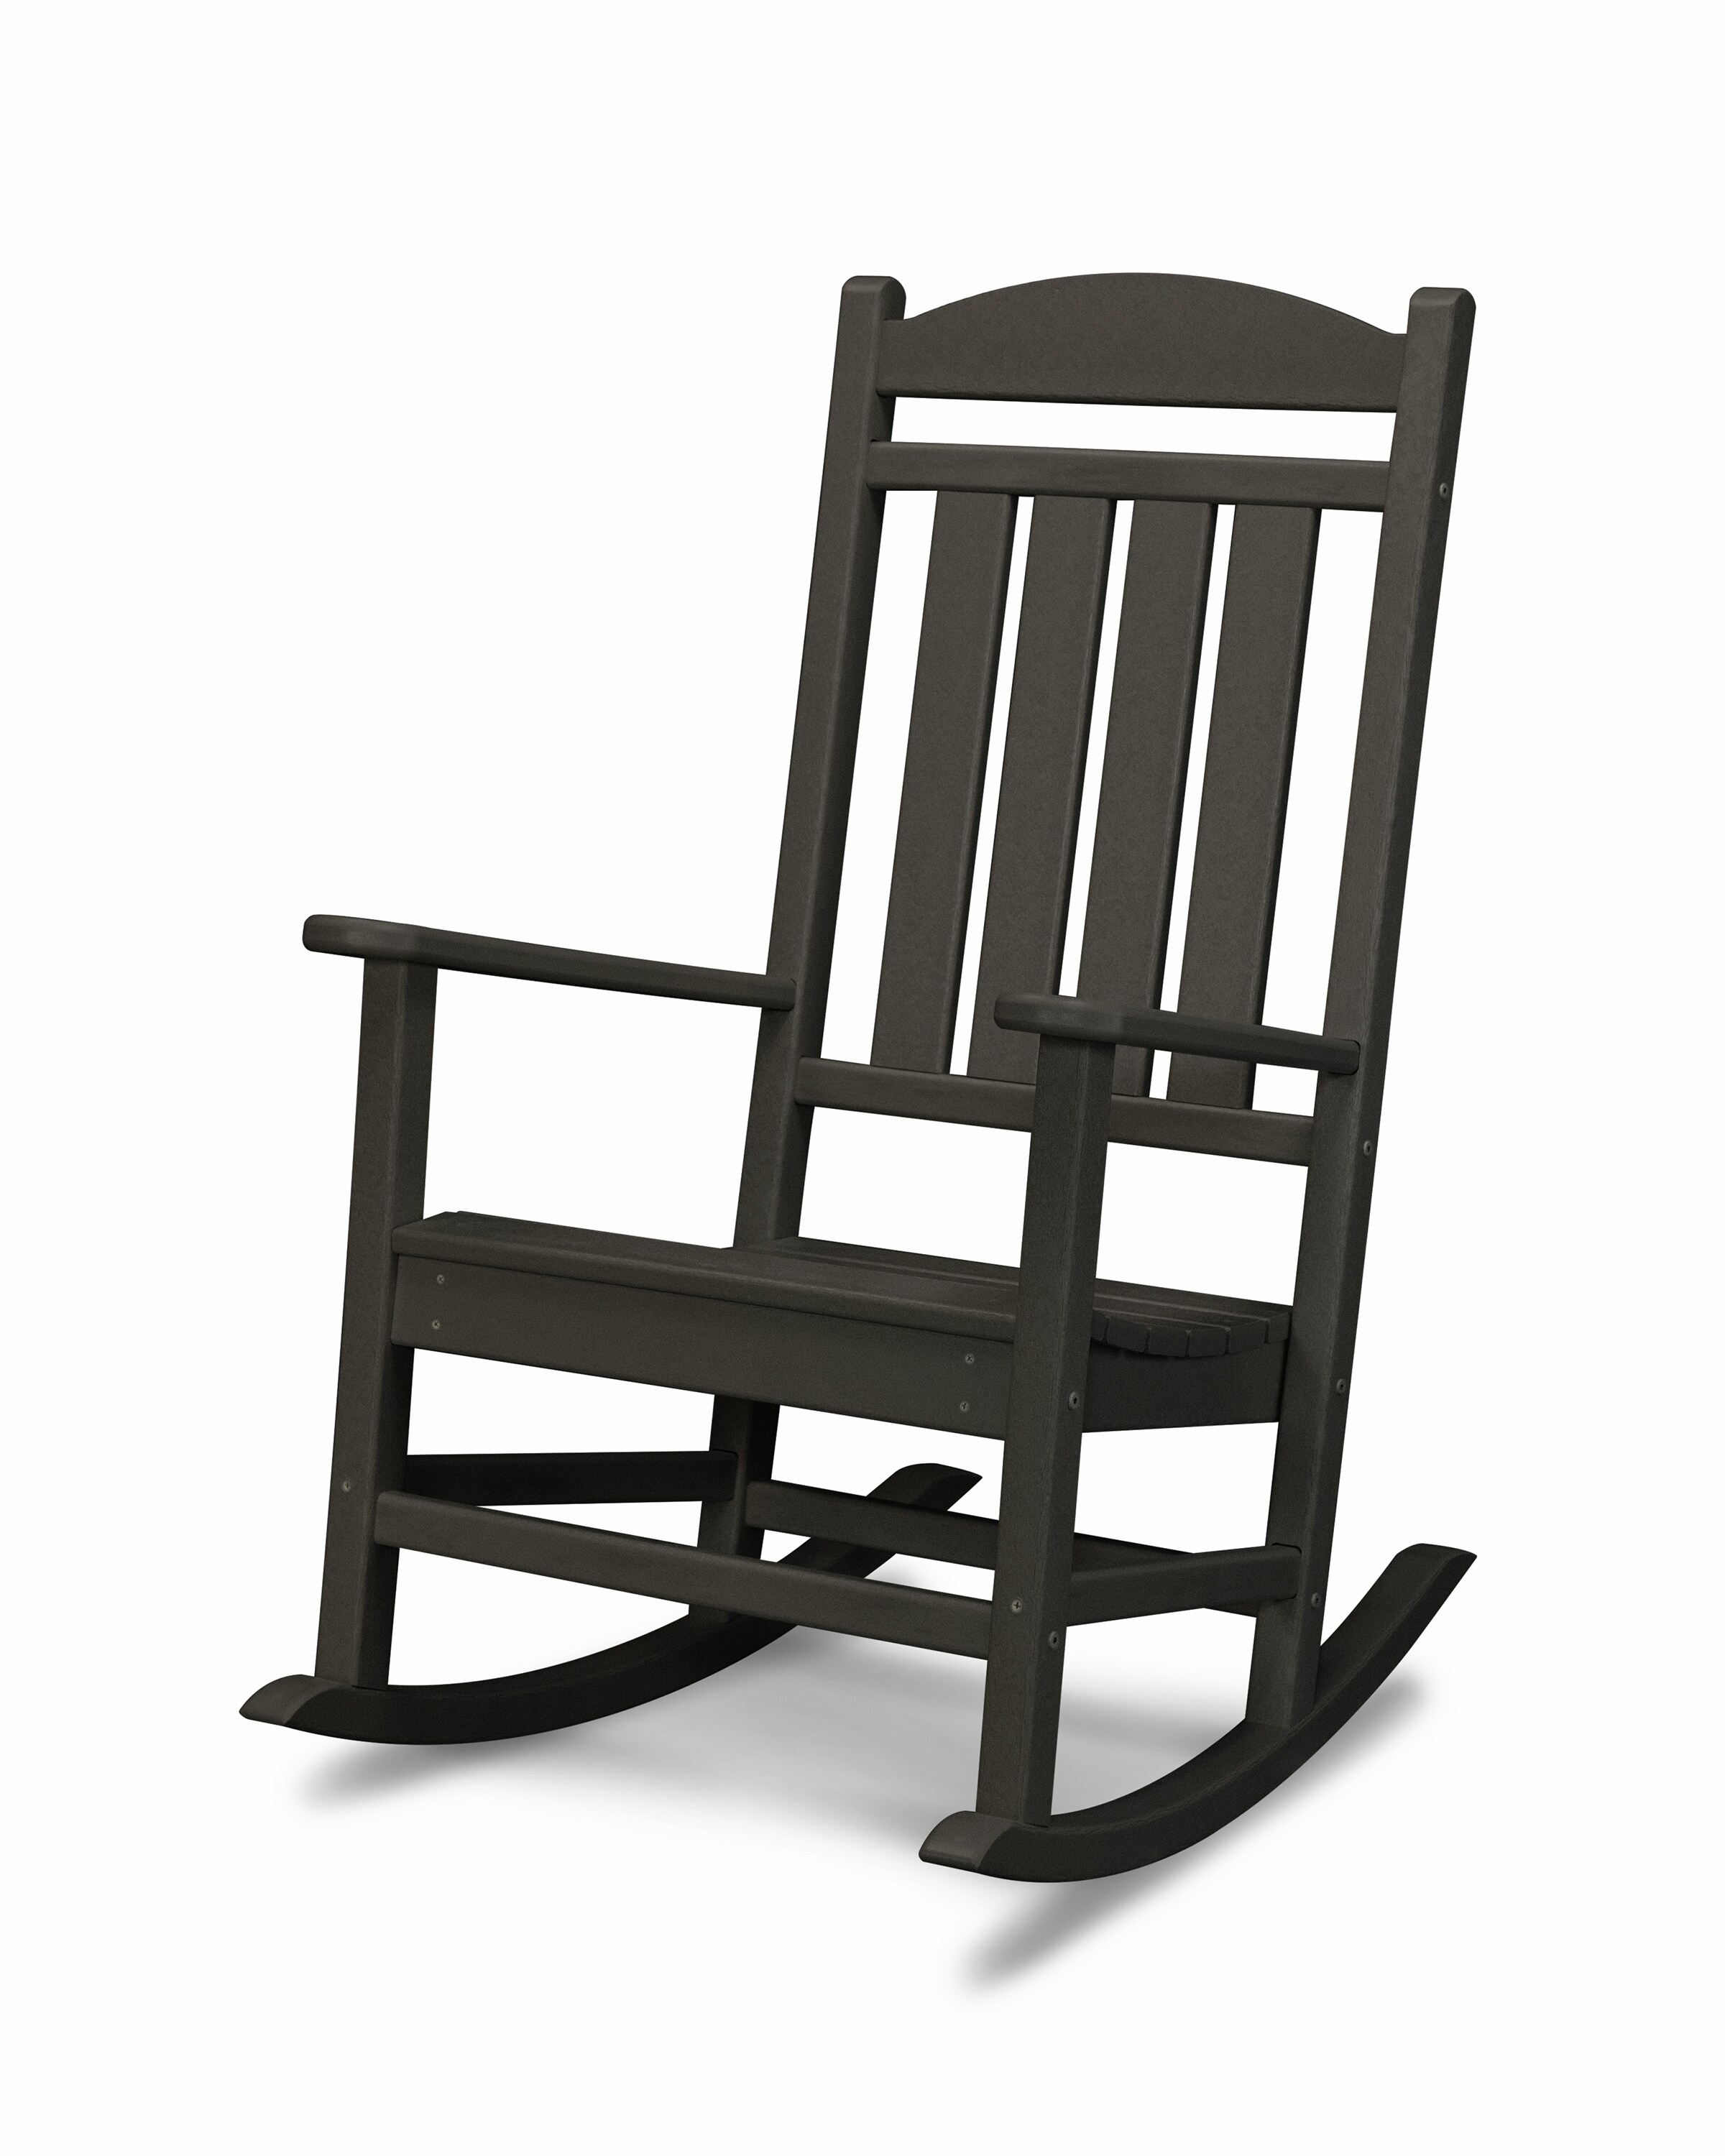 Patio Rocking Chair Contoured Seat Slatted Back Weather Resistant Wood Black 